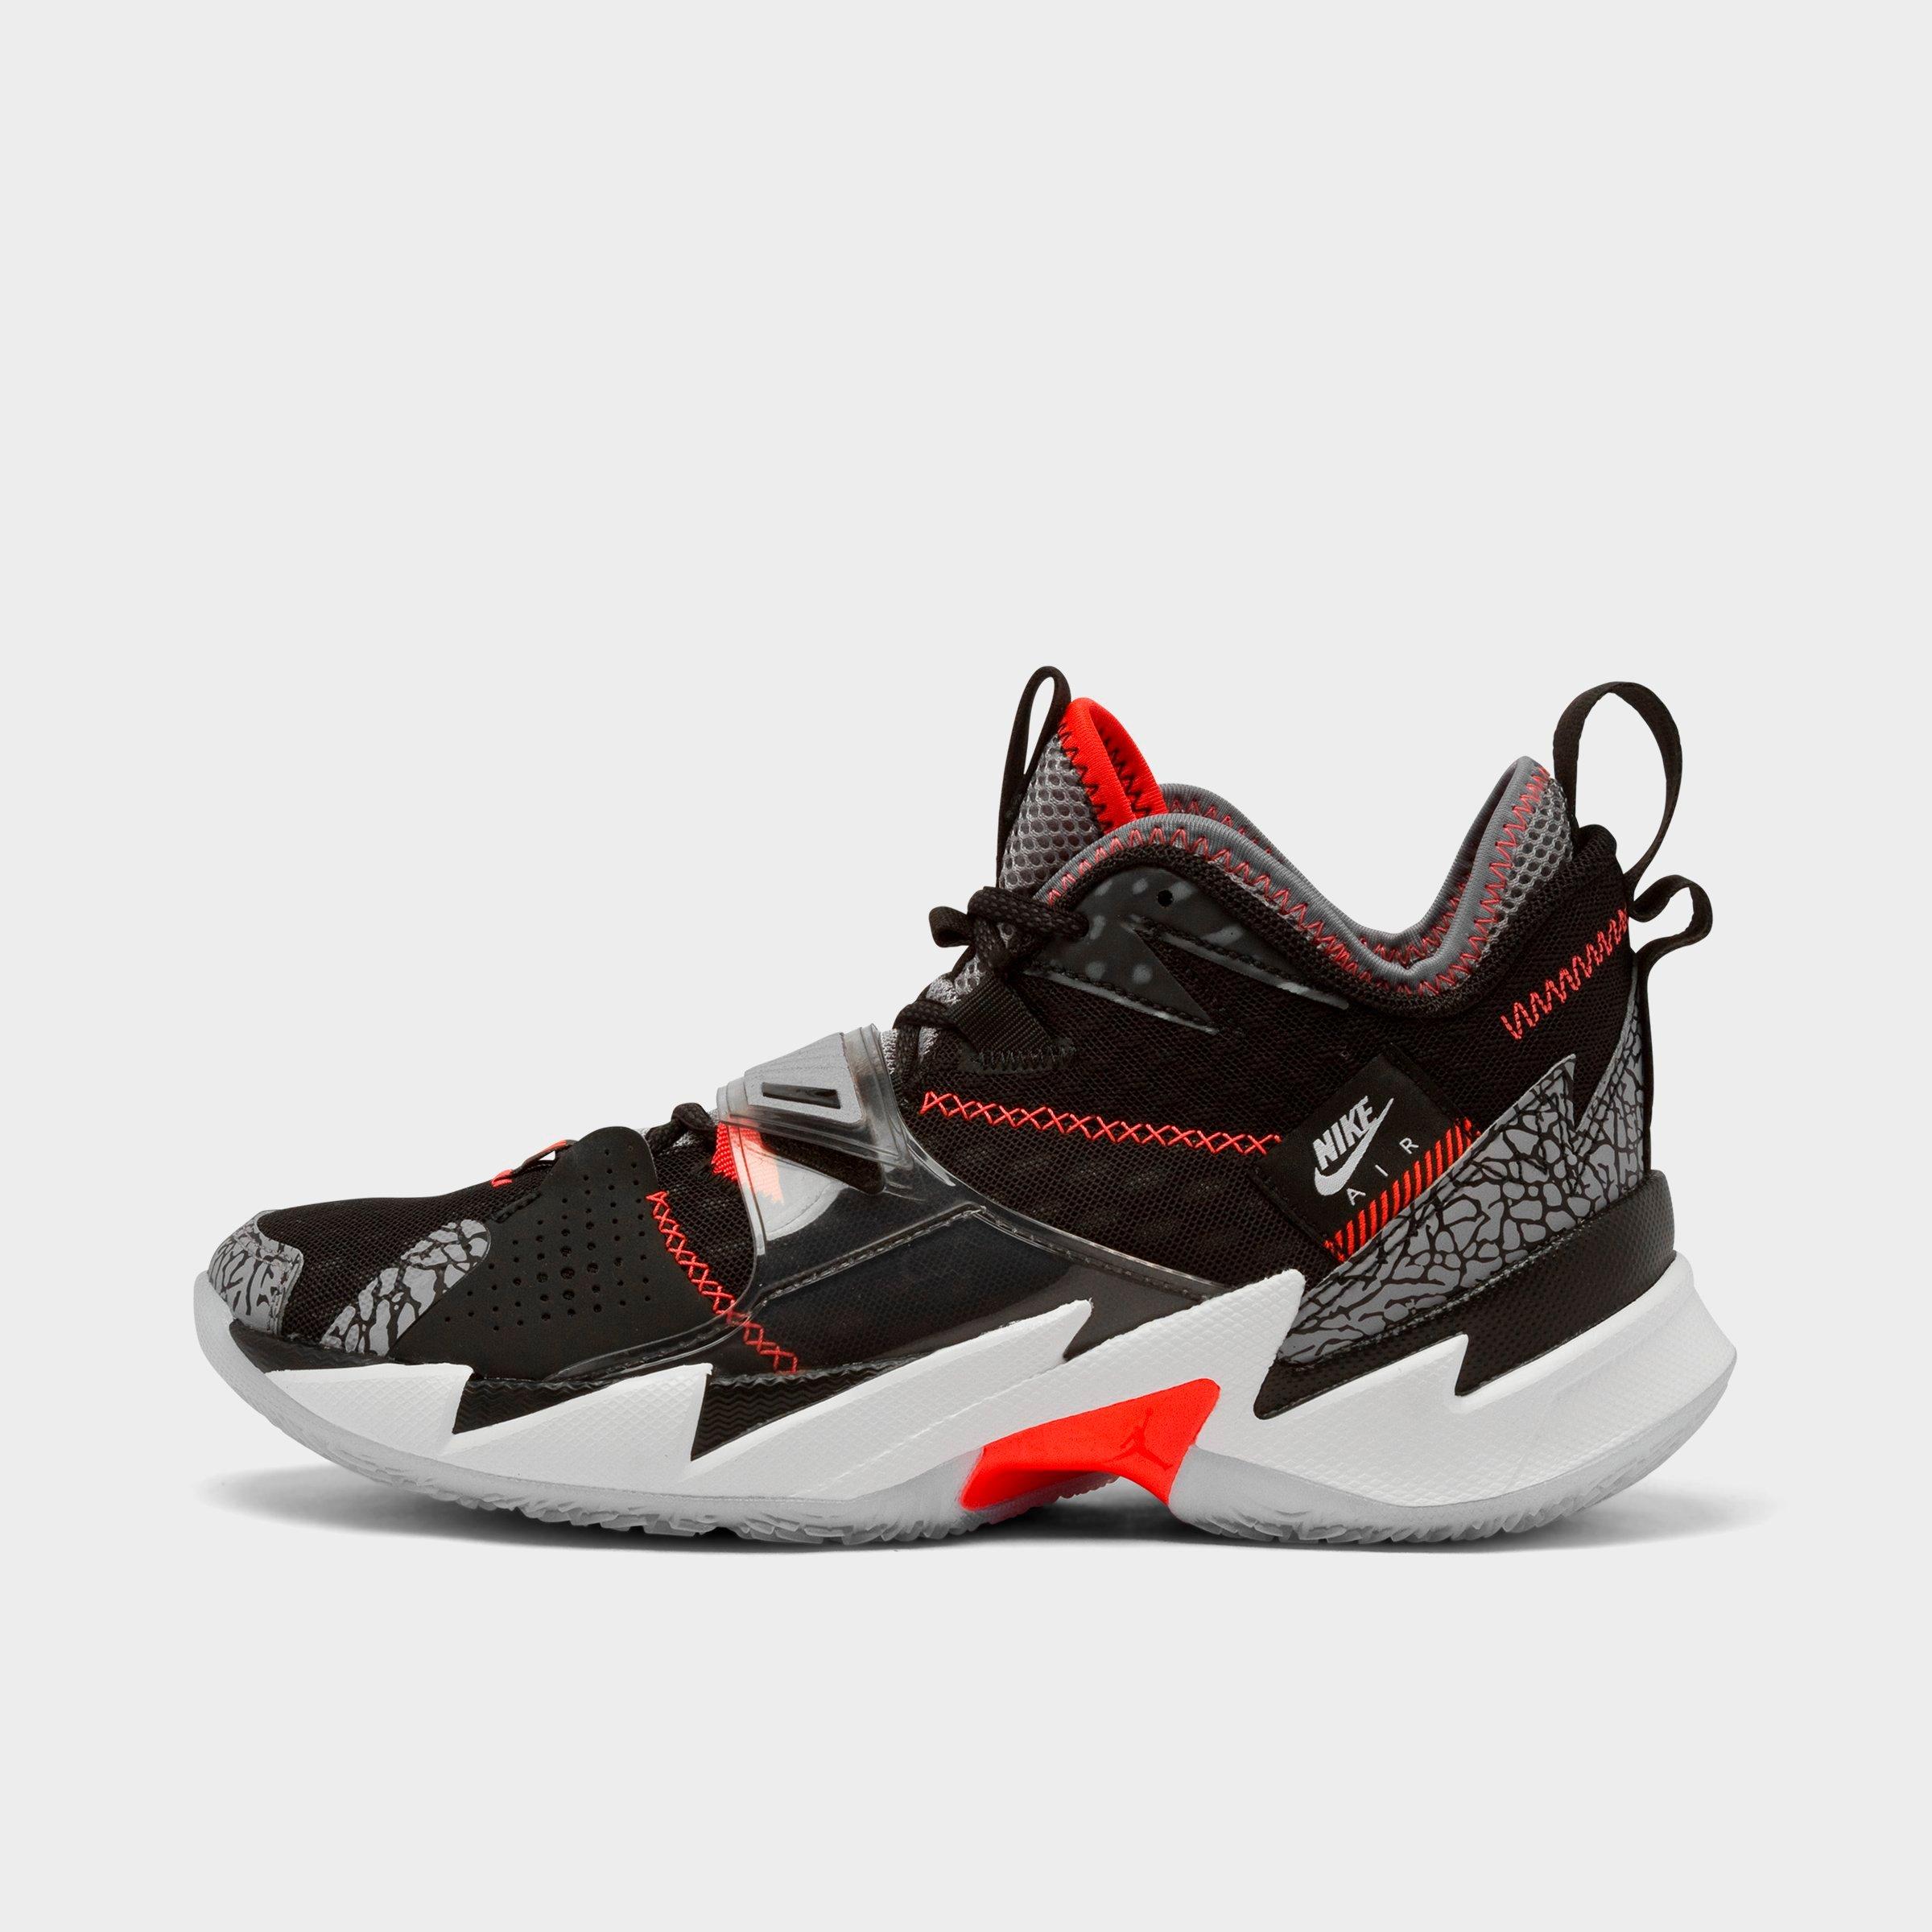 russell westbrook youth basketball shoes